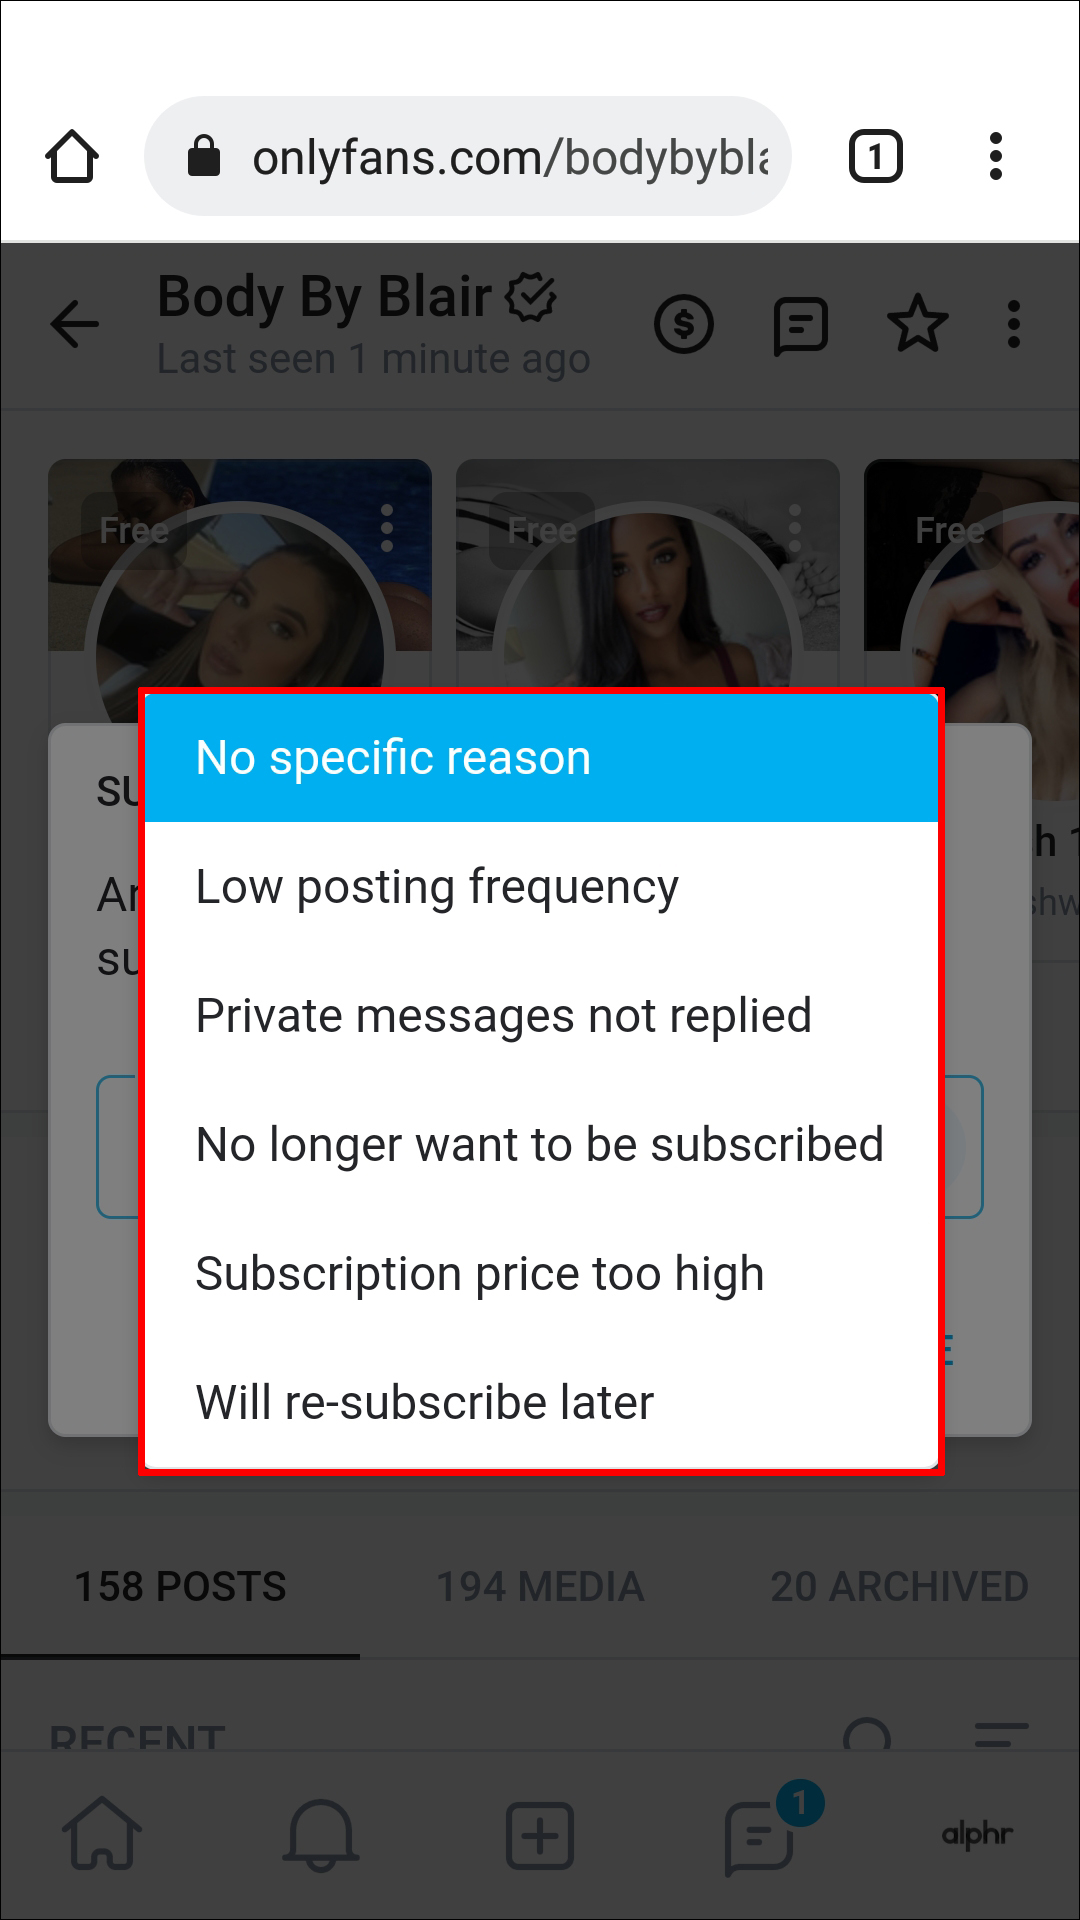 Unsubscribe from only fans